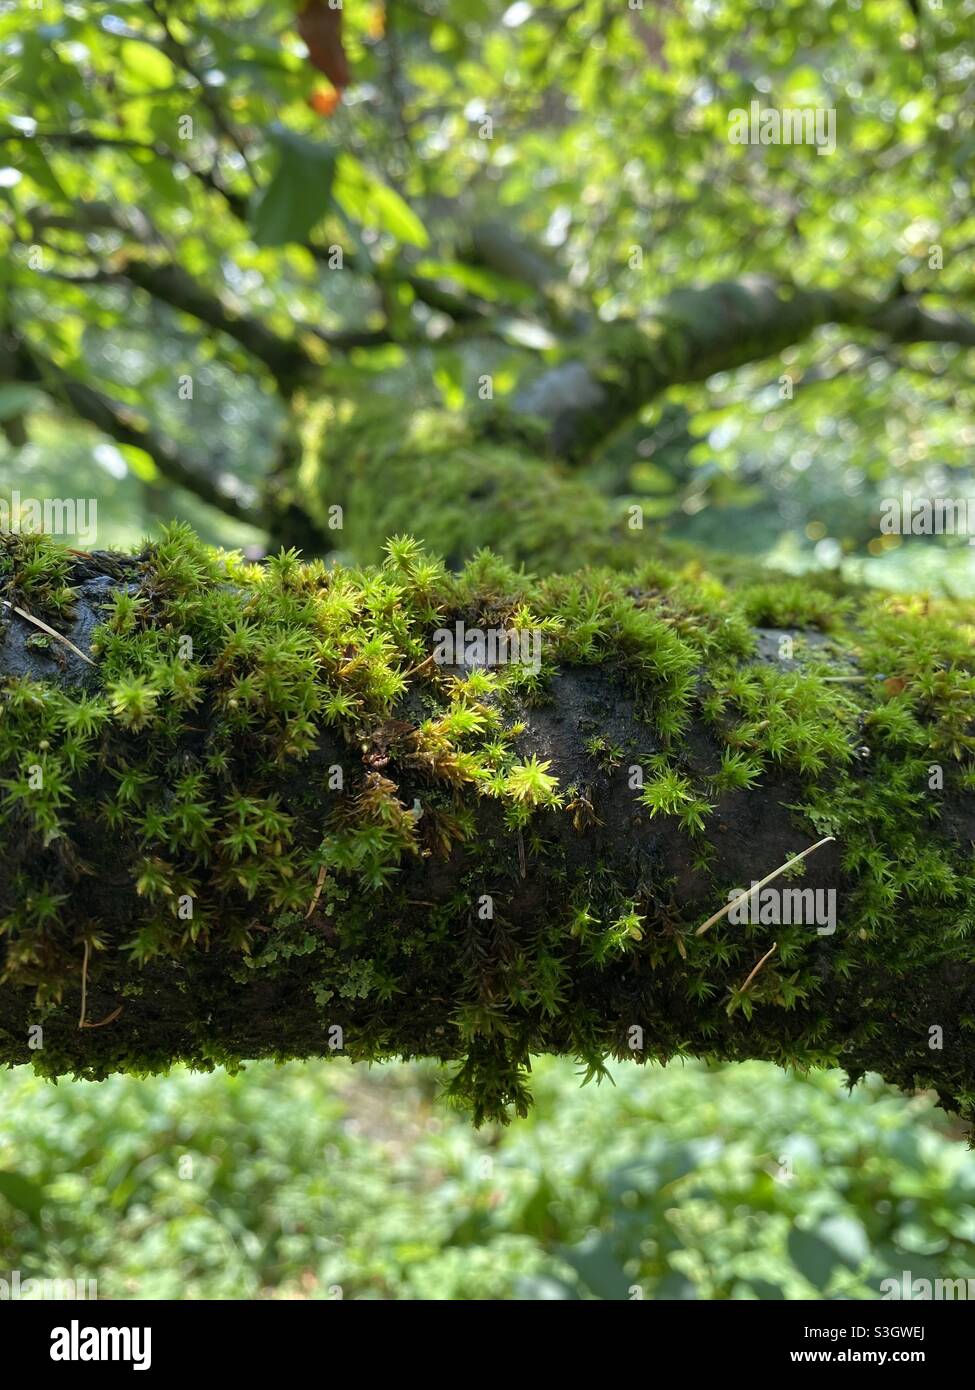 Mossy apple tree branch in the garden nature photography Stock Photo